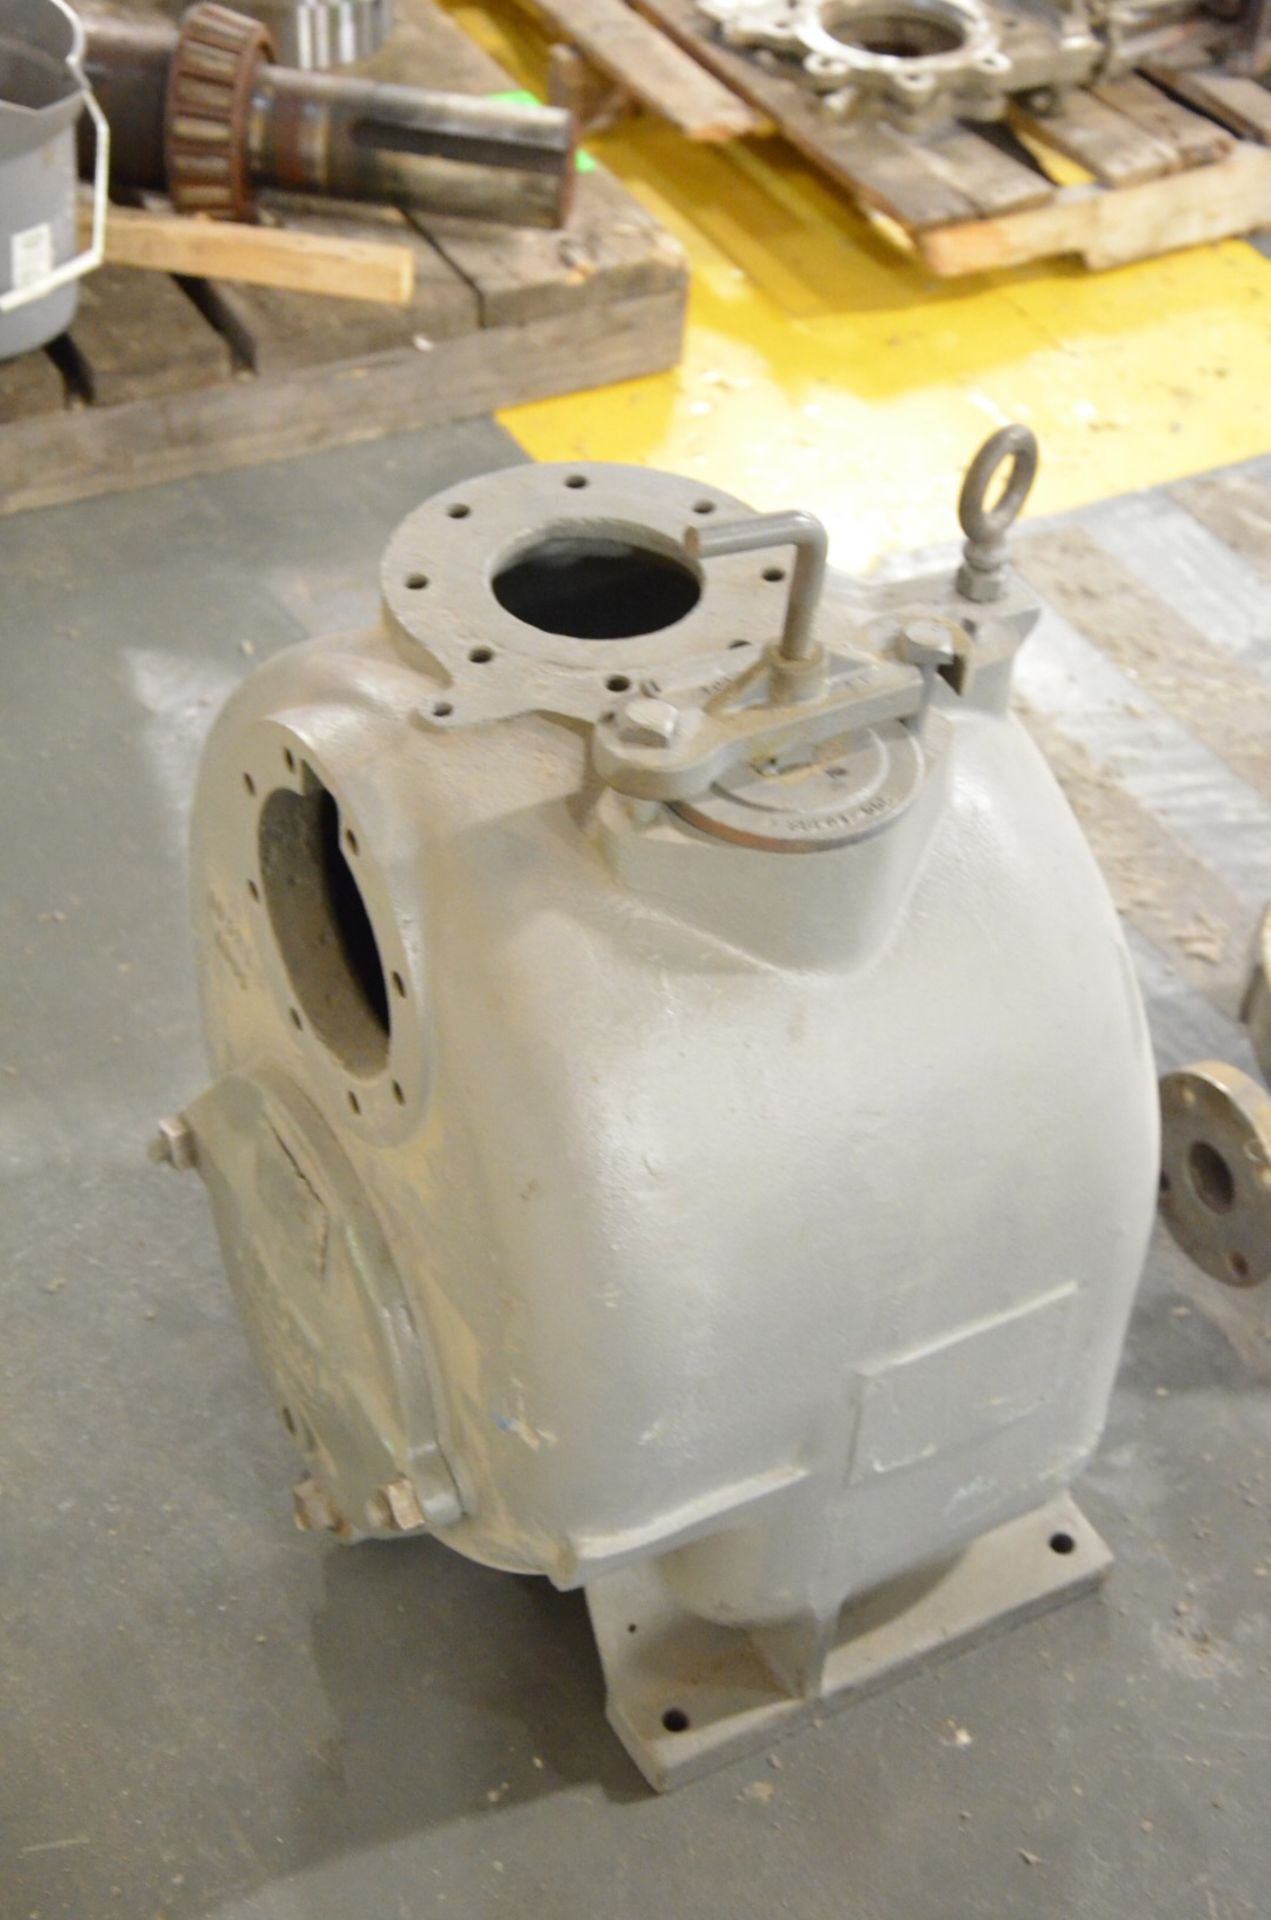 GORMAN-RUPP PUMP HOUSING [RIGGING FEE FOR LOT #1398 - $25 USD PLUS APPLICABLE TAXES] - Image 2 of 3